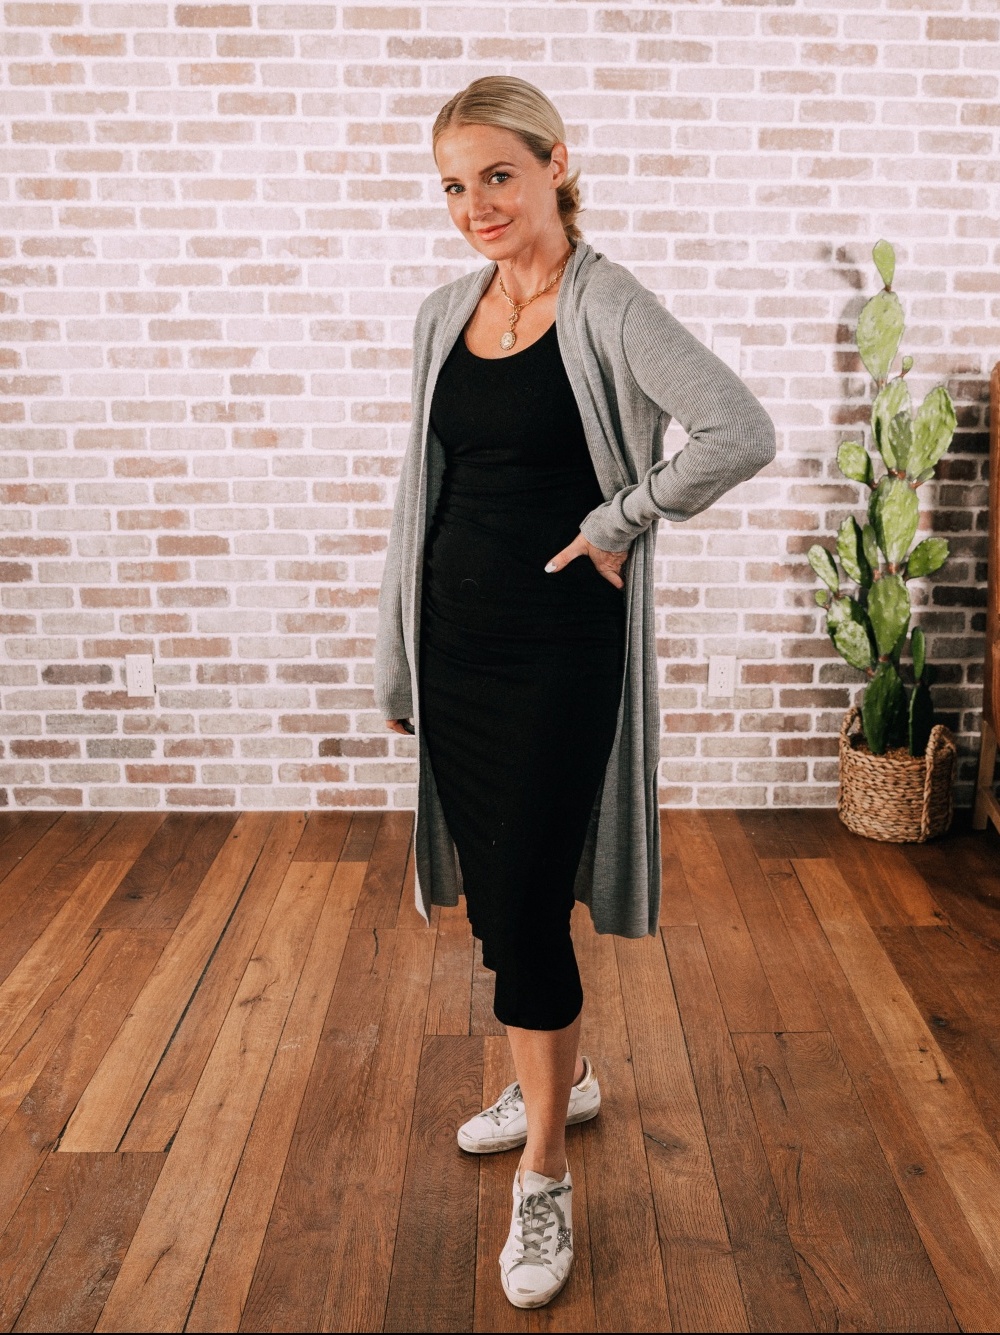 Stylish Work From Home Outfits, Fashion blogger BusbeeStyle wearing black tank dress with long cardigan and golden goose sneakers in Telluride, Colorado